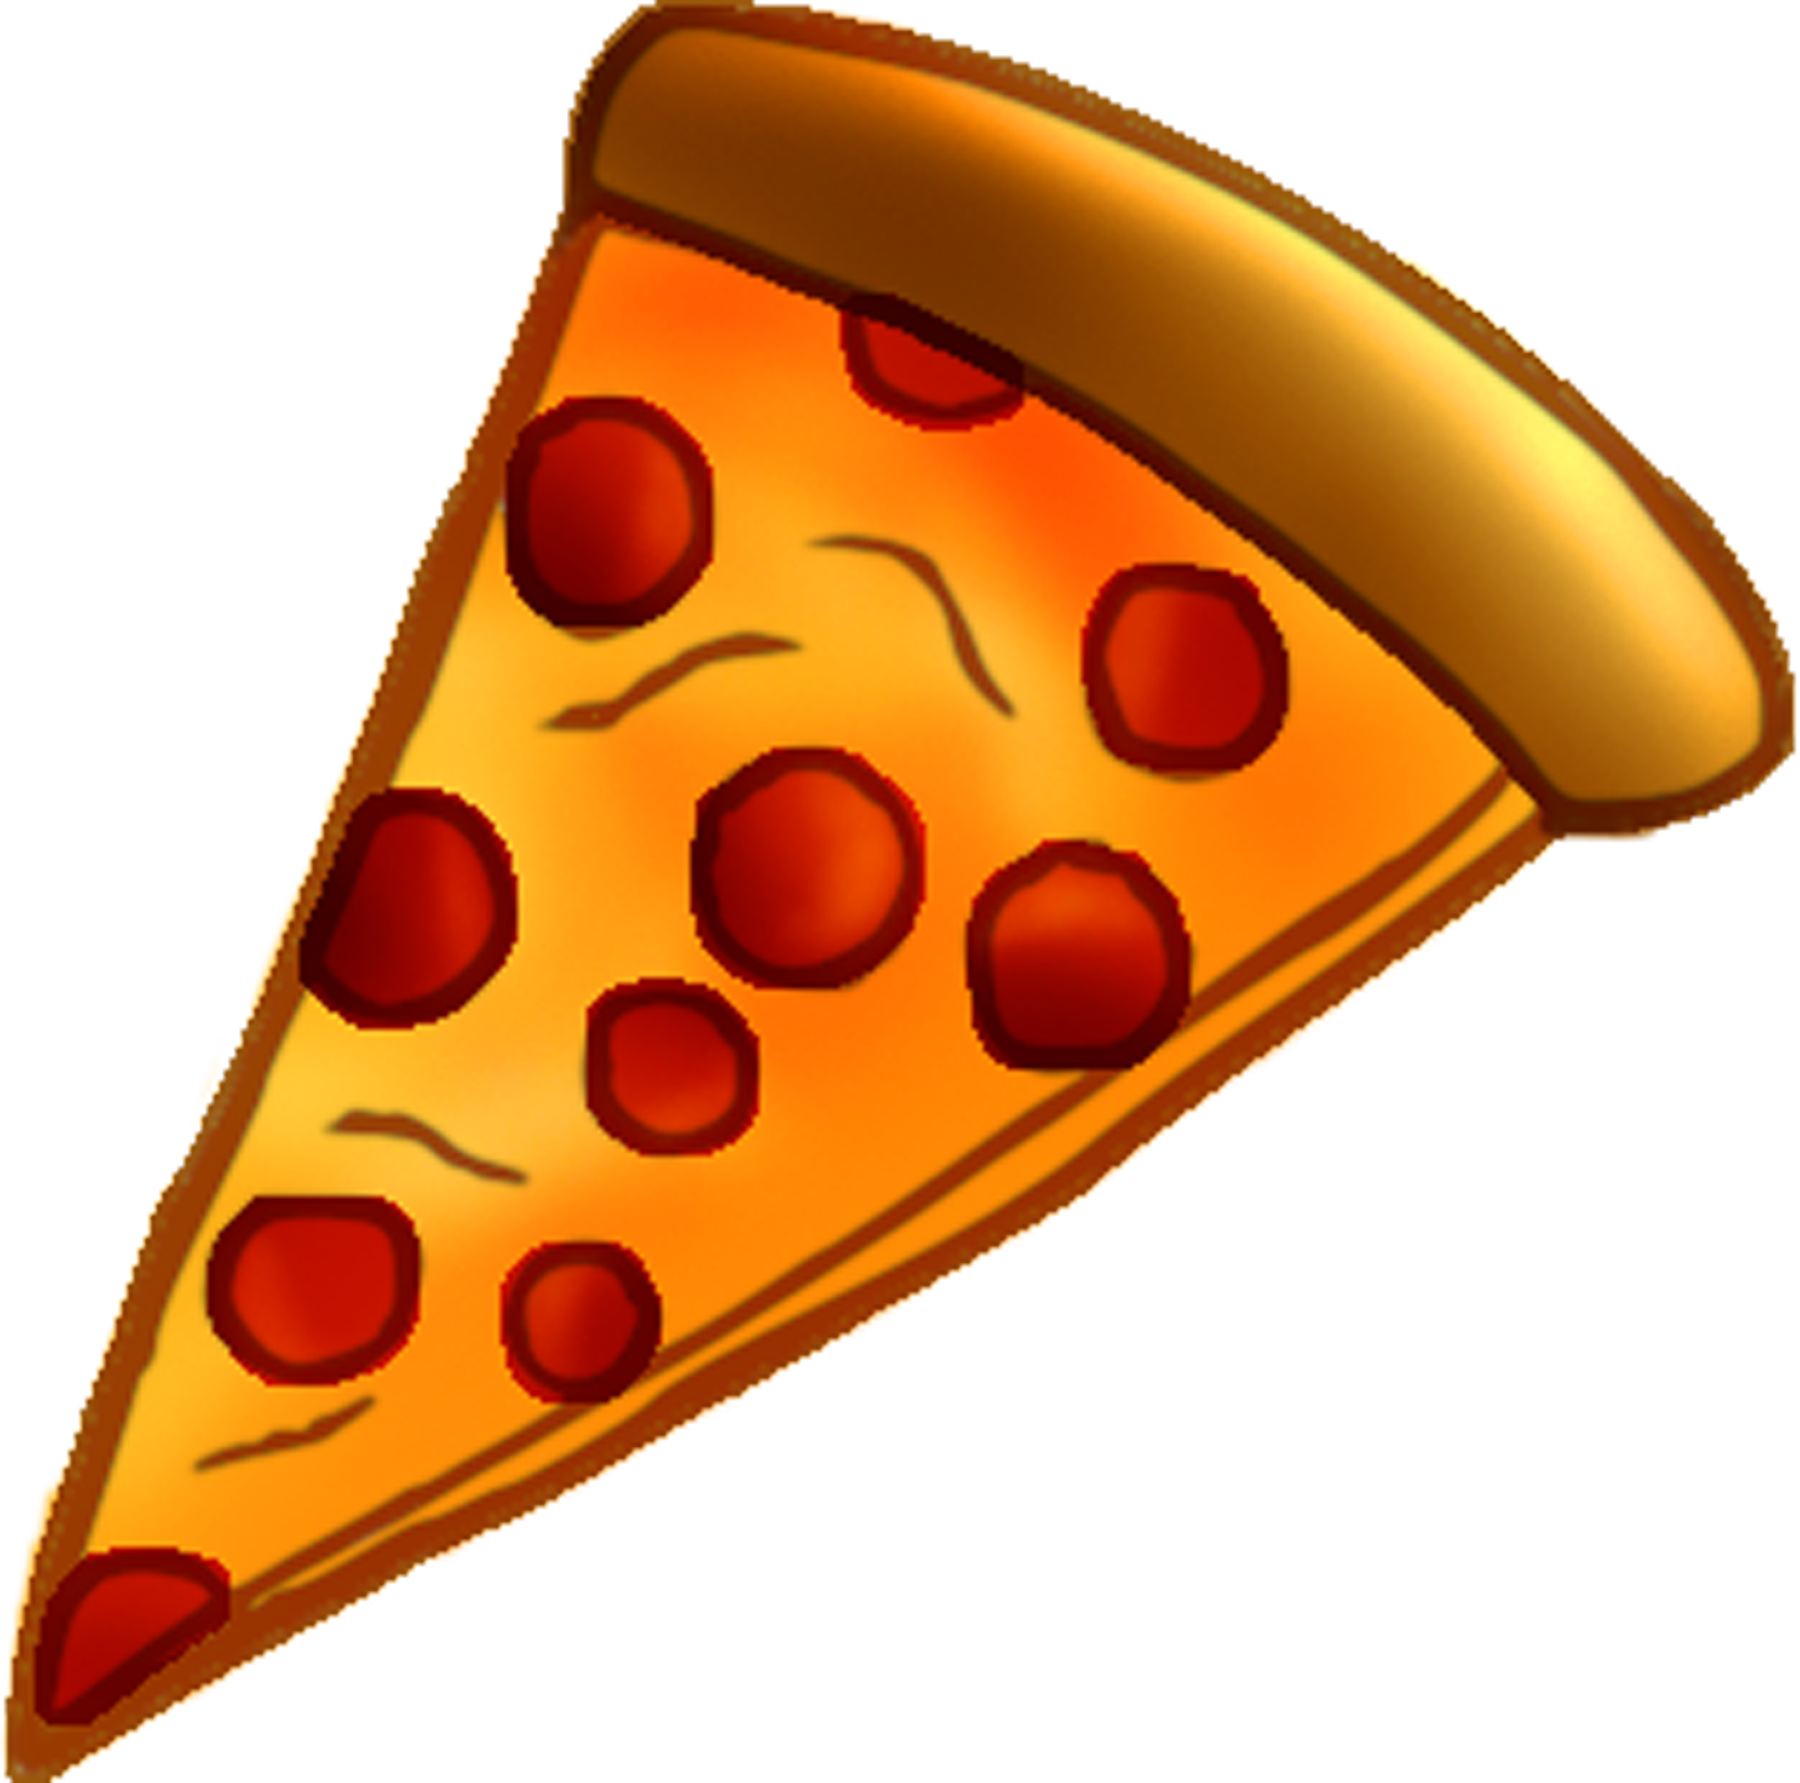 Cheese pizza clipart free clipartfest